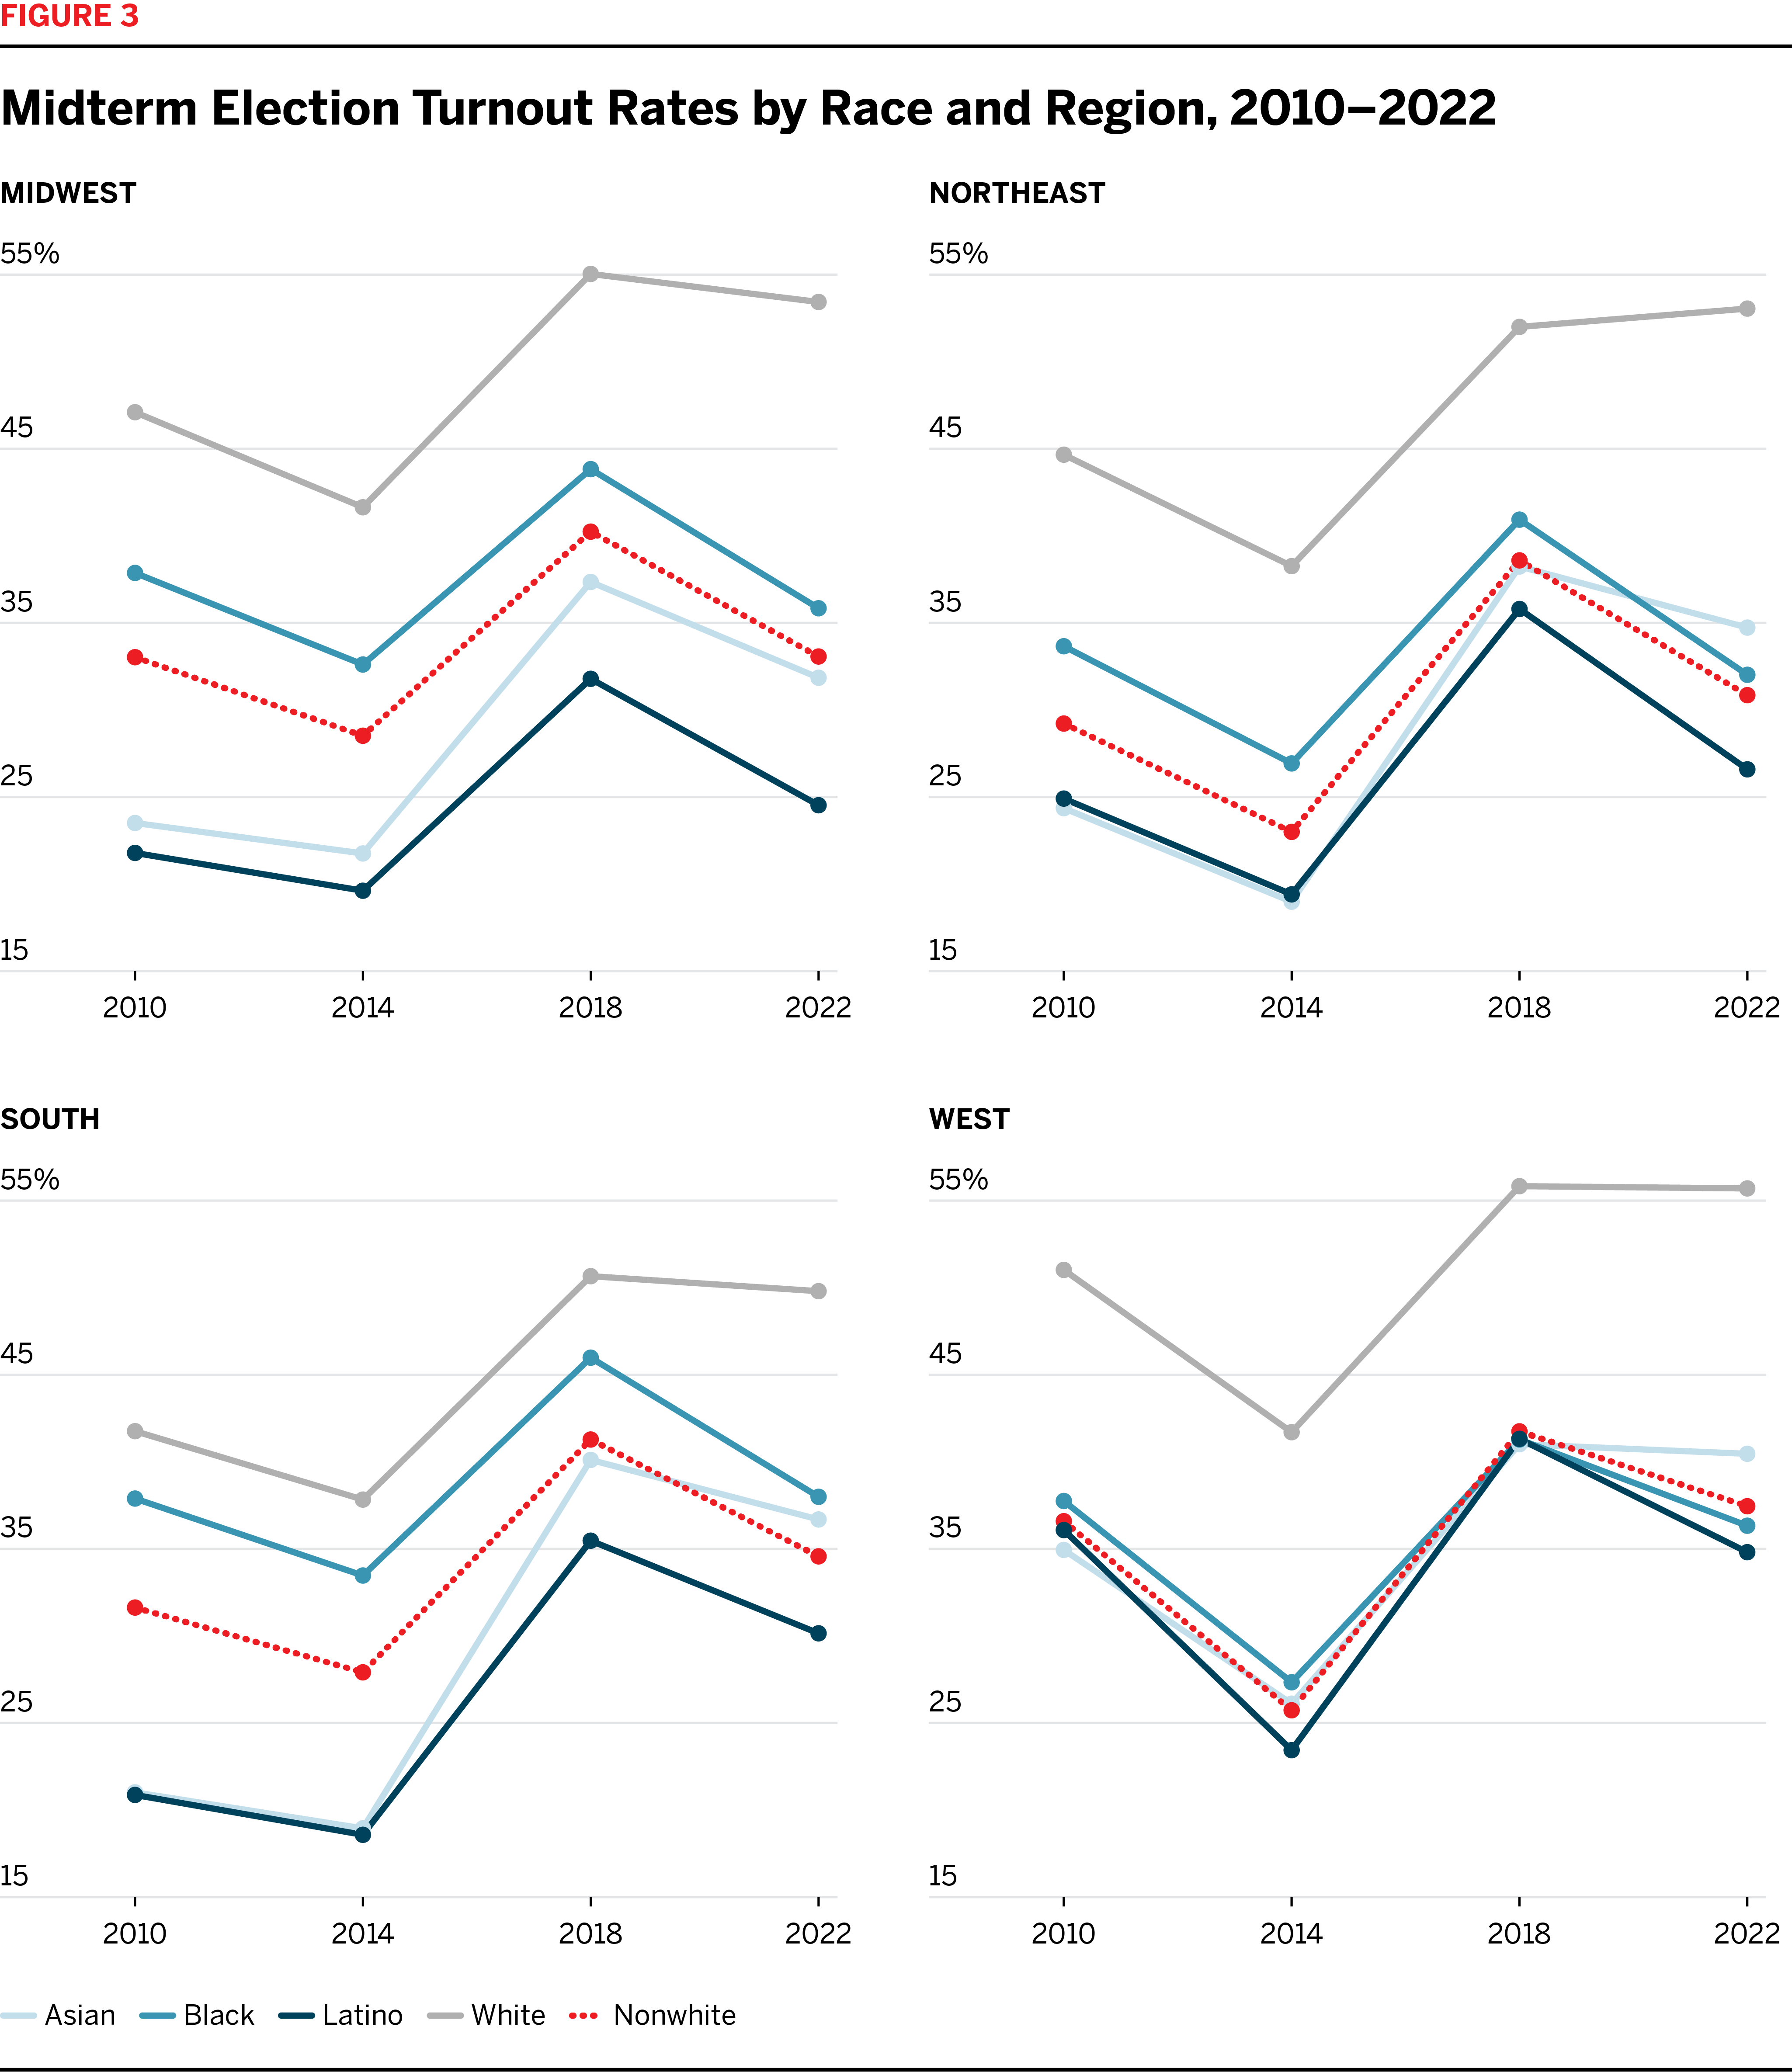 Midterm Election Turnout Rates by Race and Region, 2010-2020 line graphs